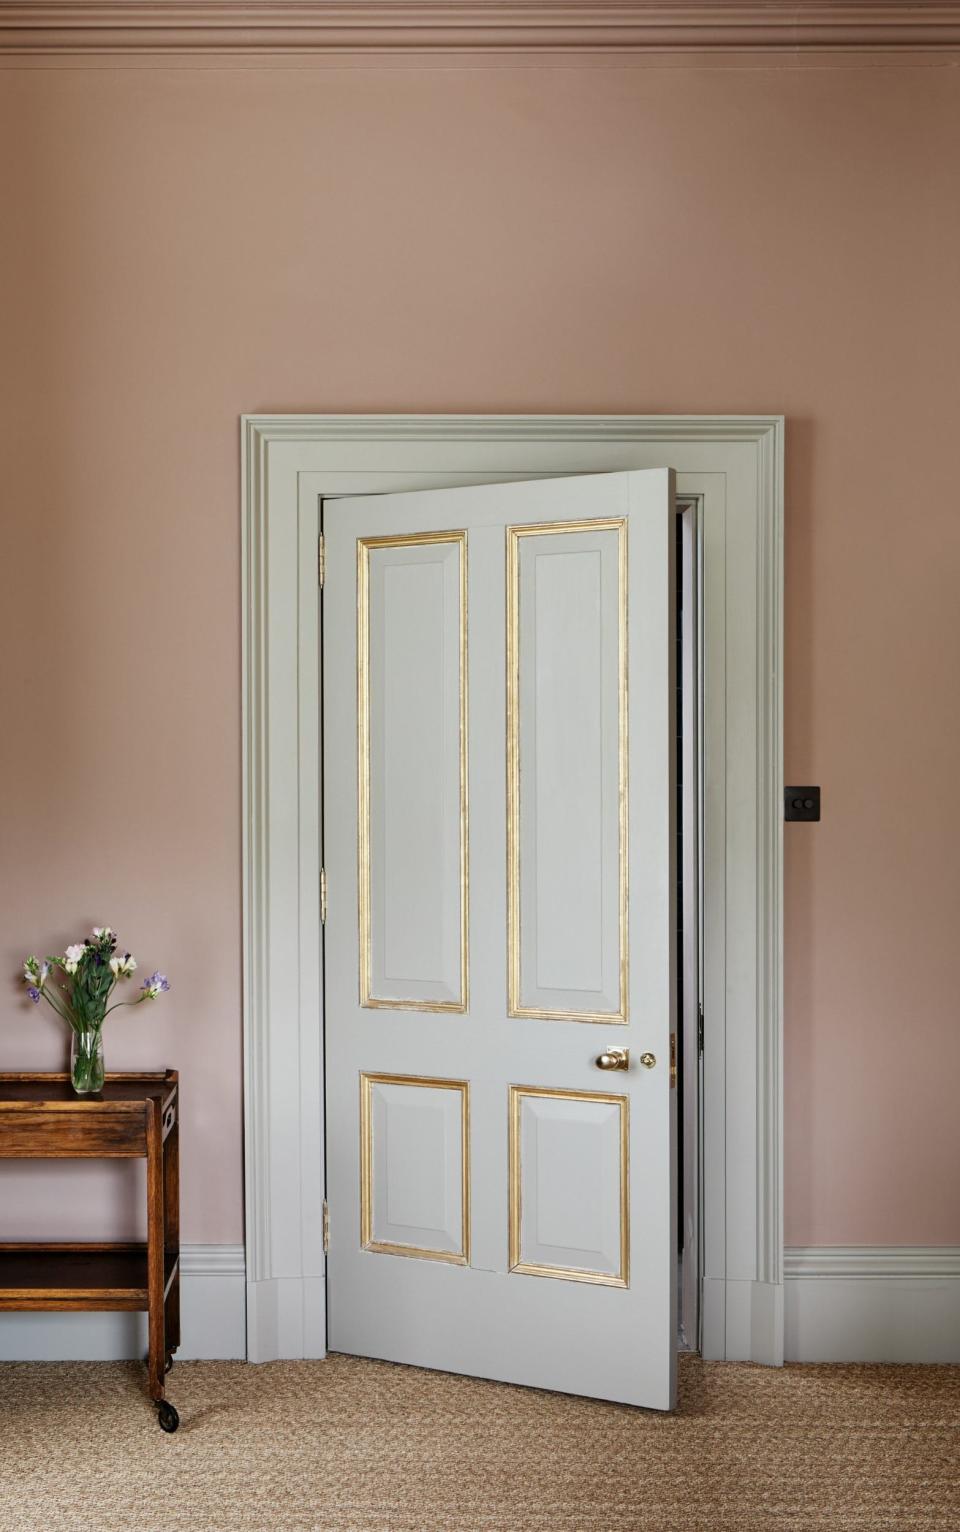 Door trim - The Country House Diaries 